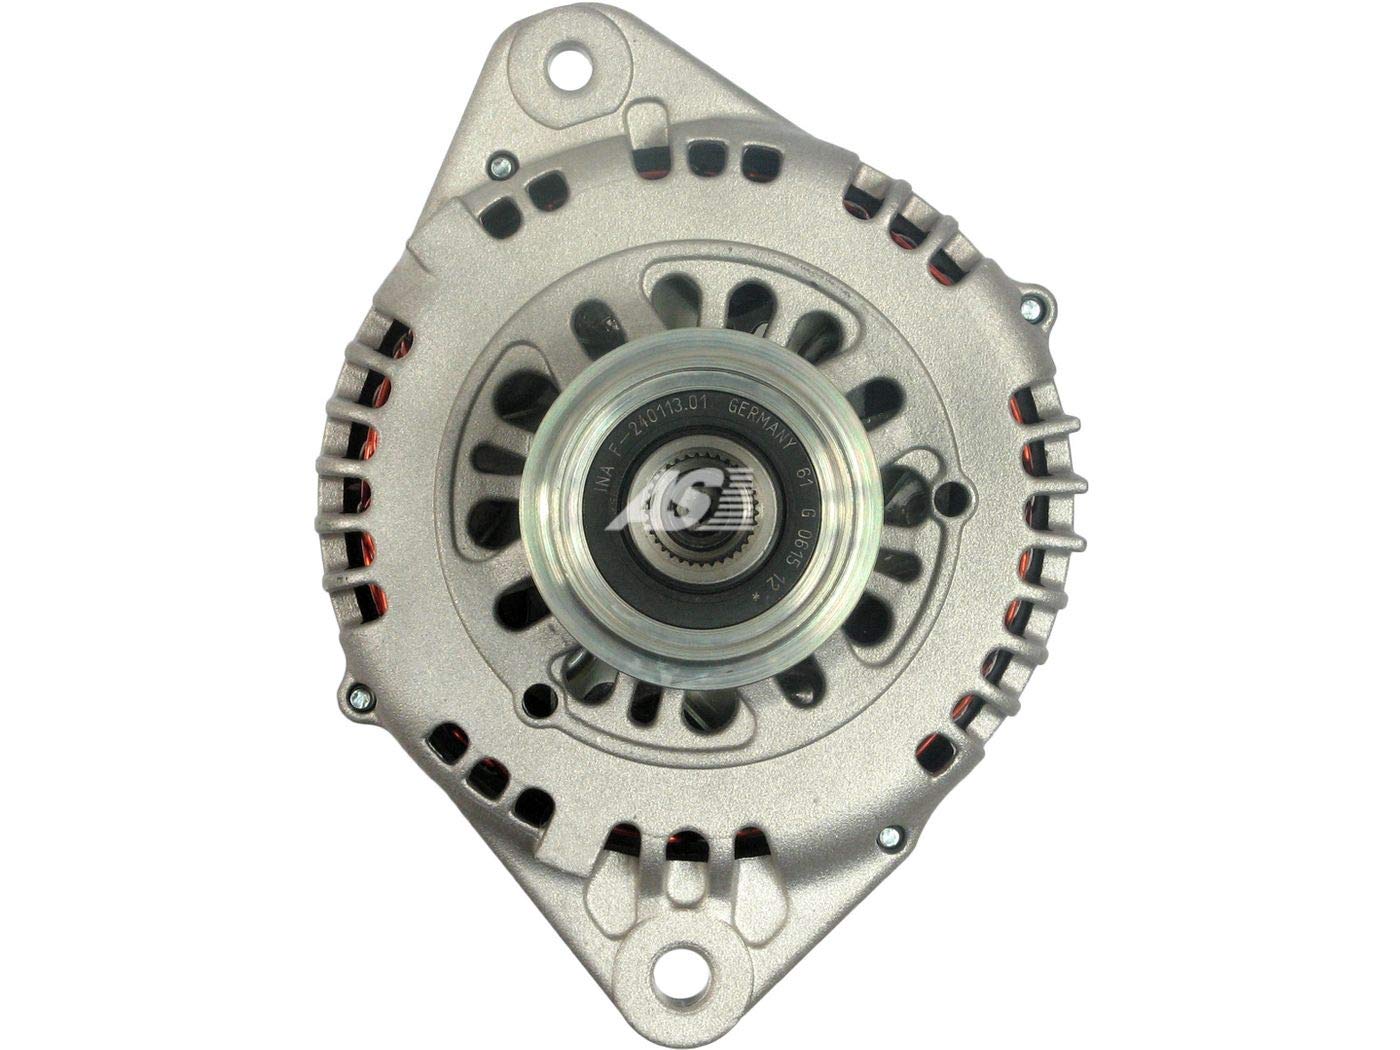 Brand new AS-PL Alternator with INA Free Wheel Pulley - A2022(P-INA) von AS-PL